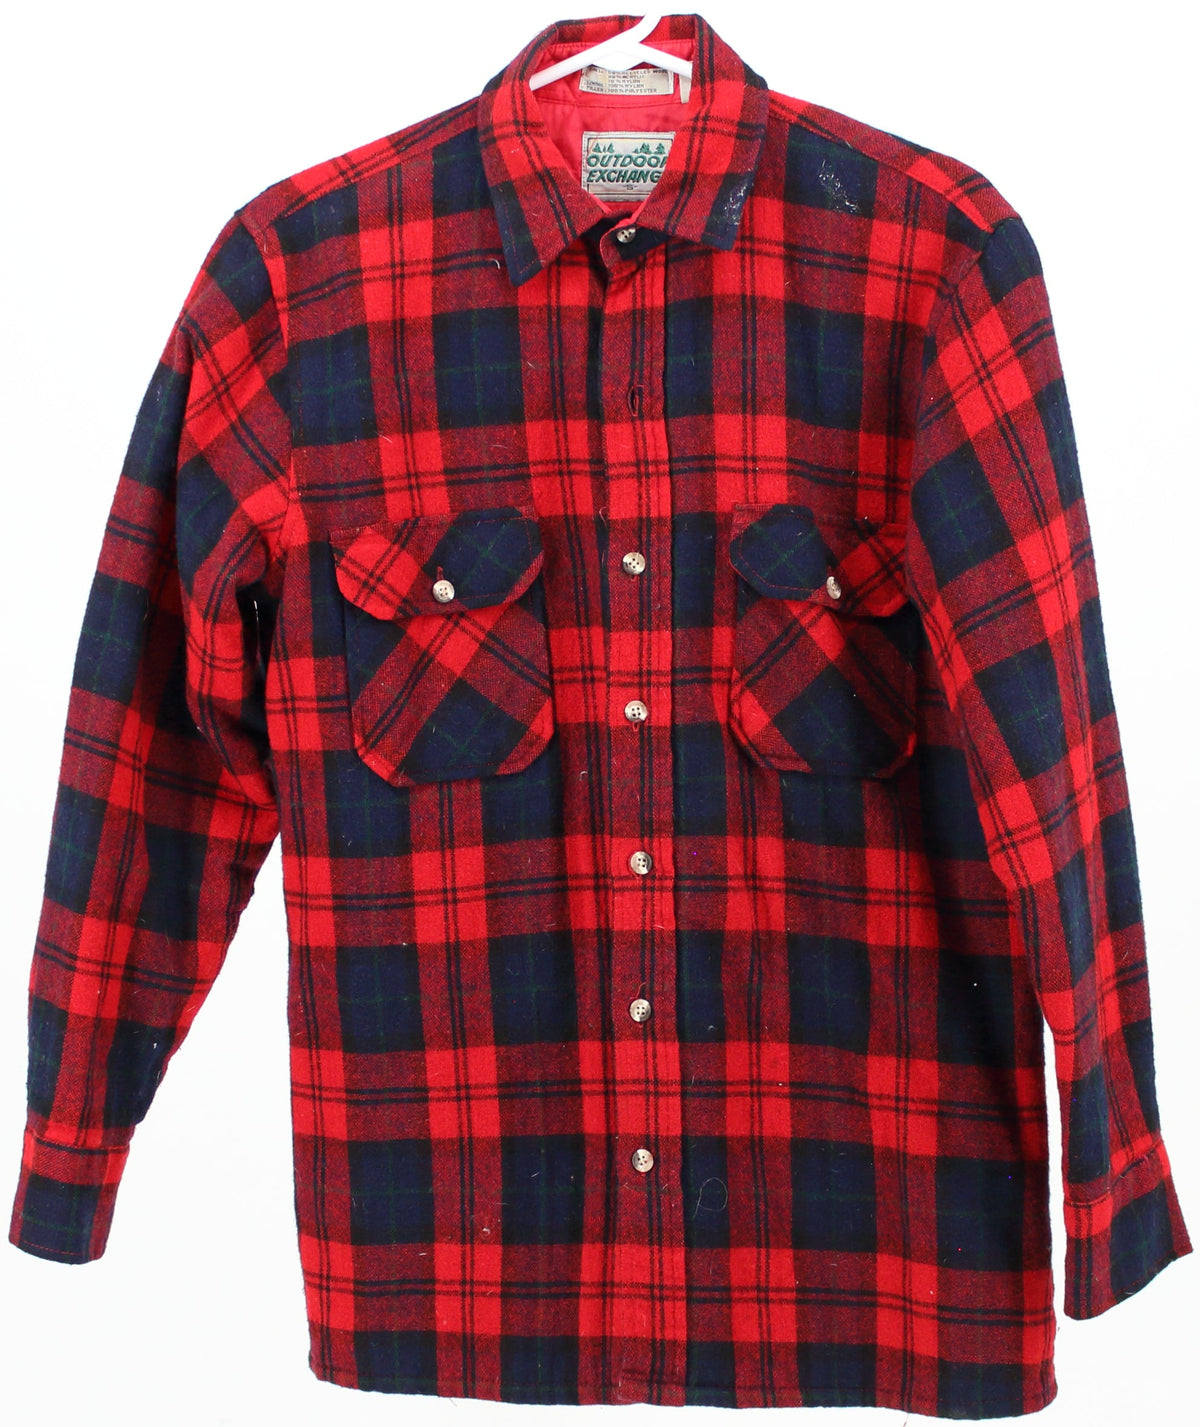 Outdoor Exchange Navy Blue Red and Green Plaid Shirt